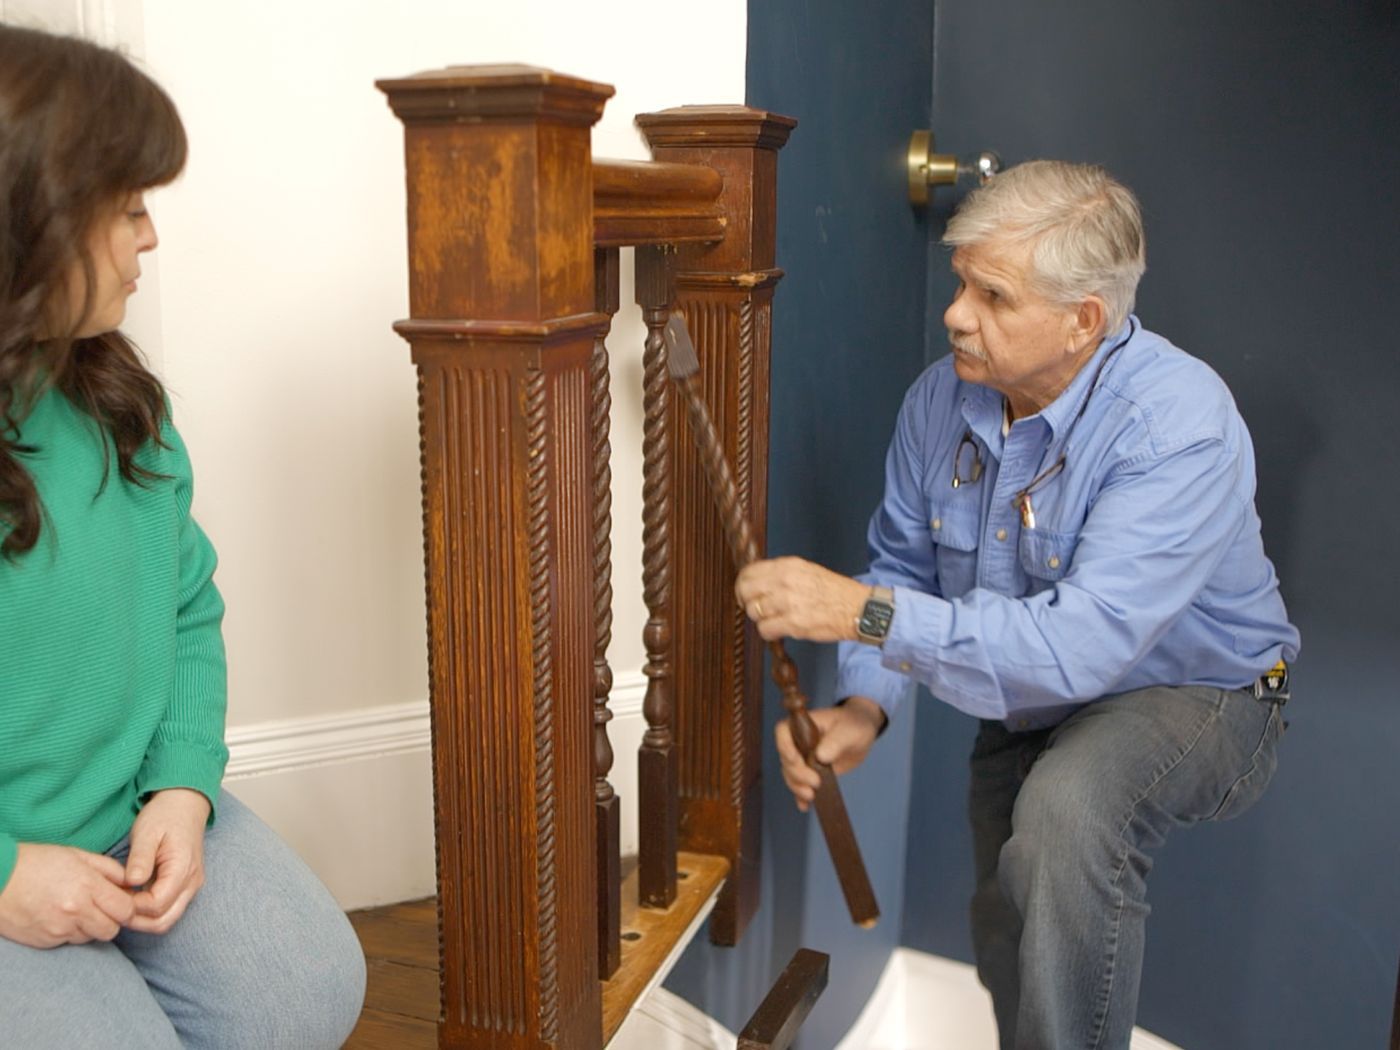 S21 E24, Tom Silva replaces a baluster spindle